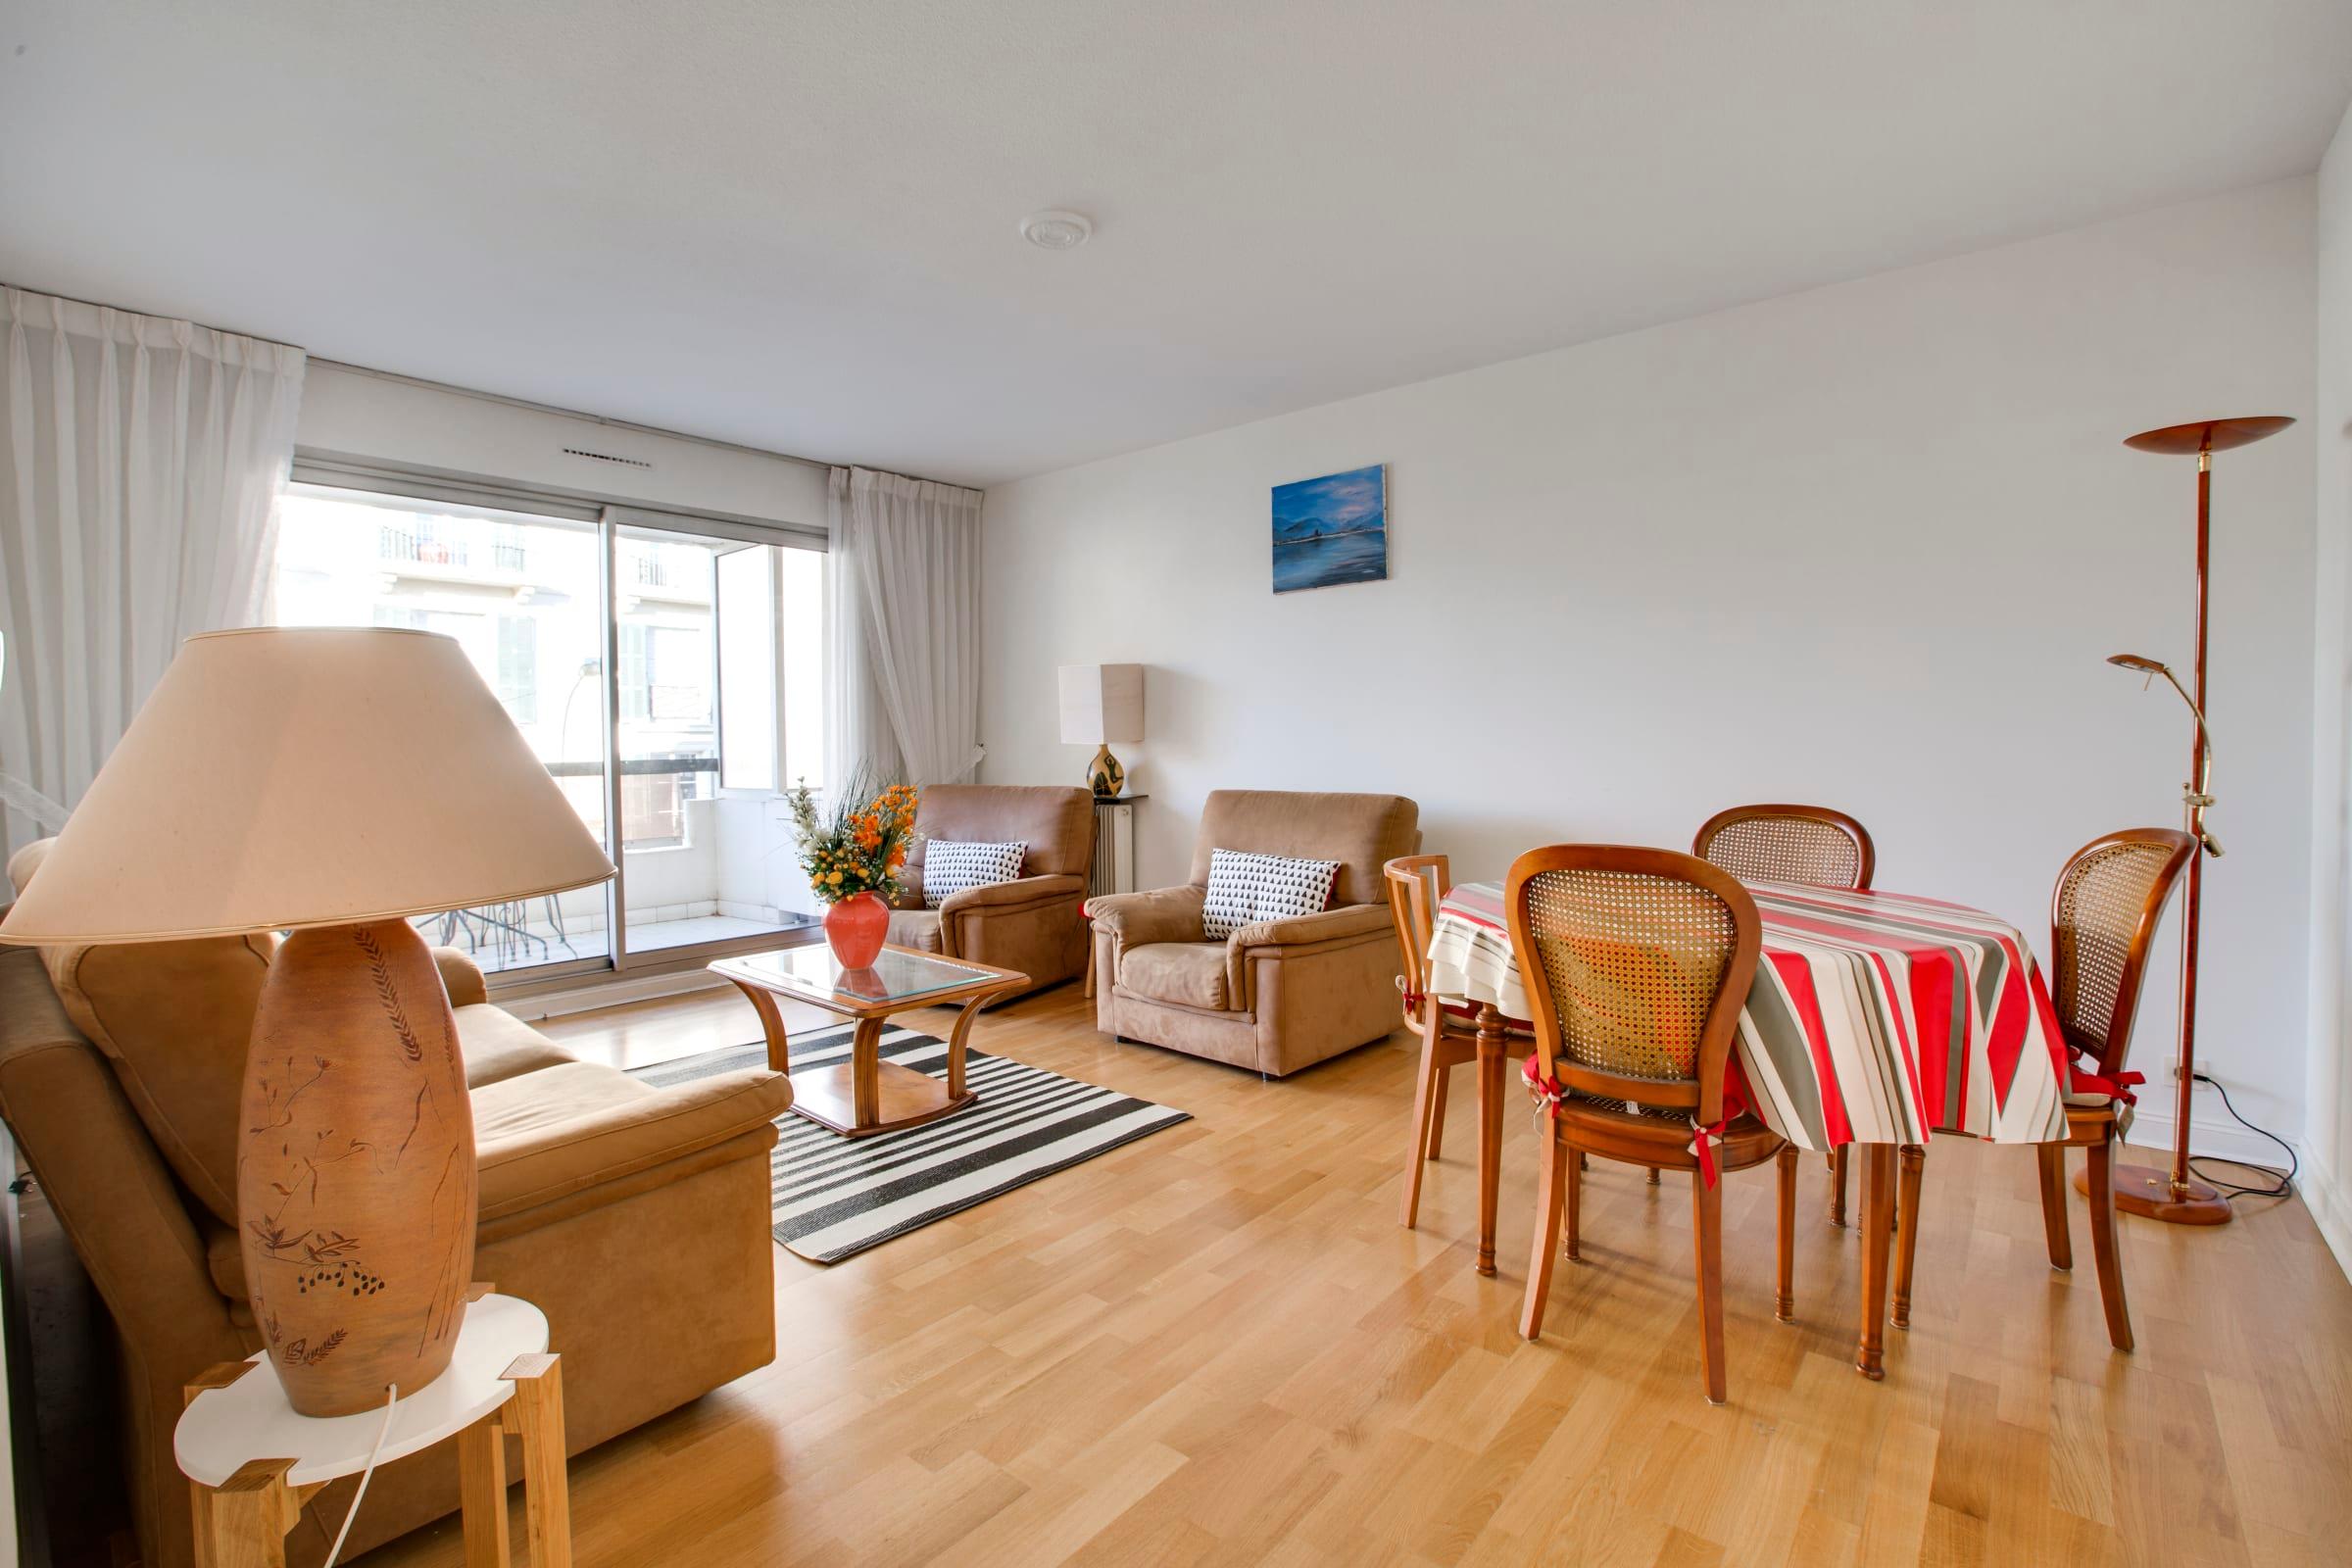 Property Image 2 - Sunny apartment in Biarritz, close to the beach